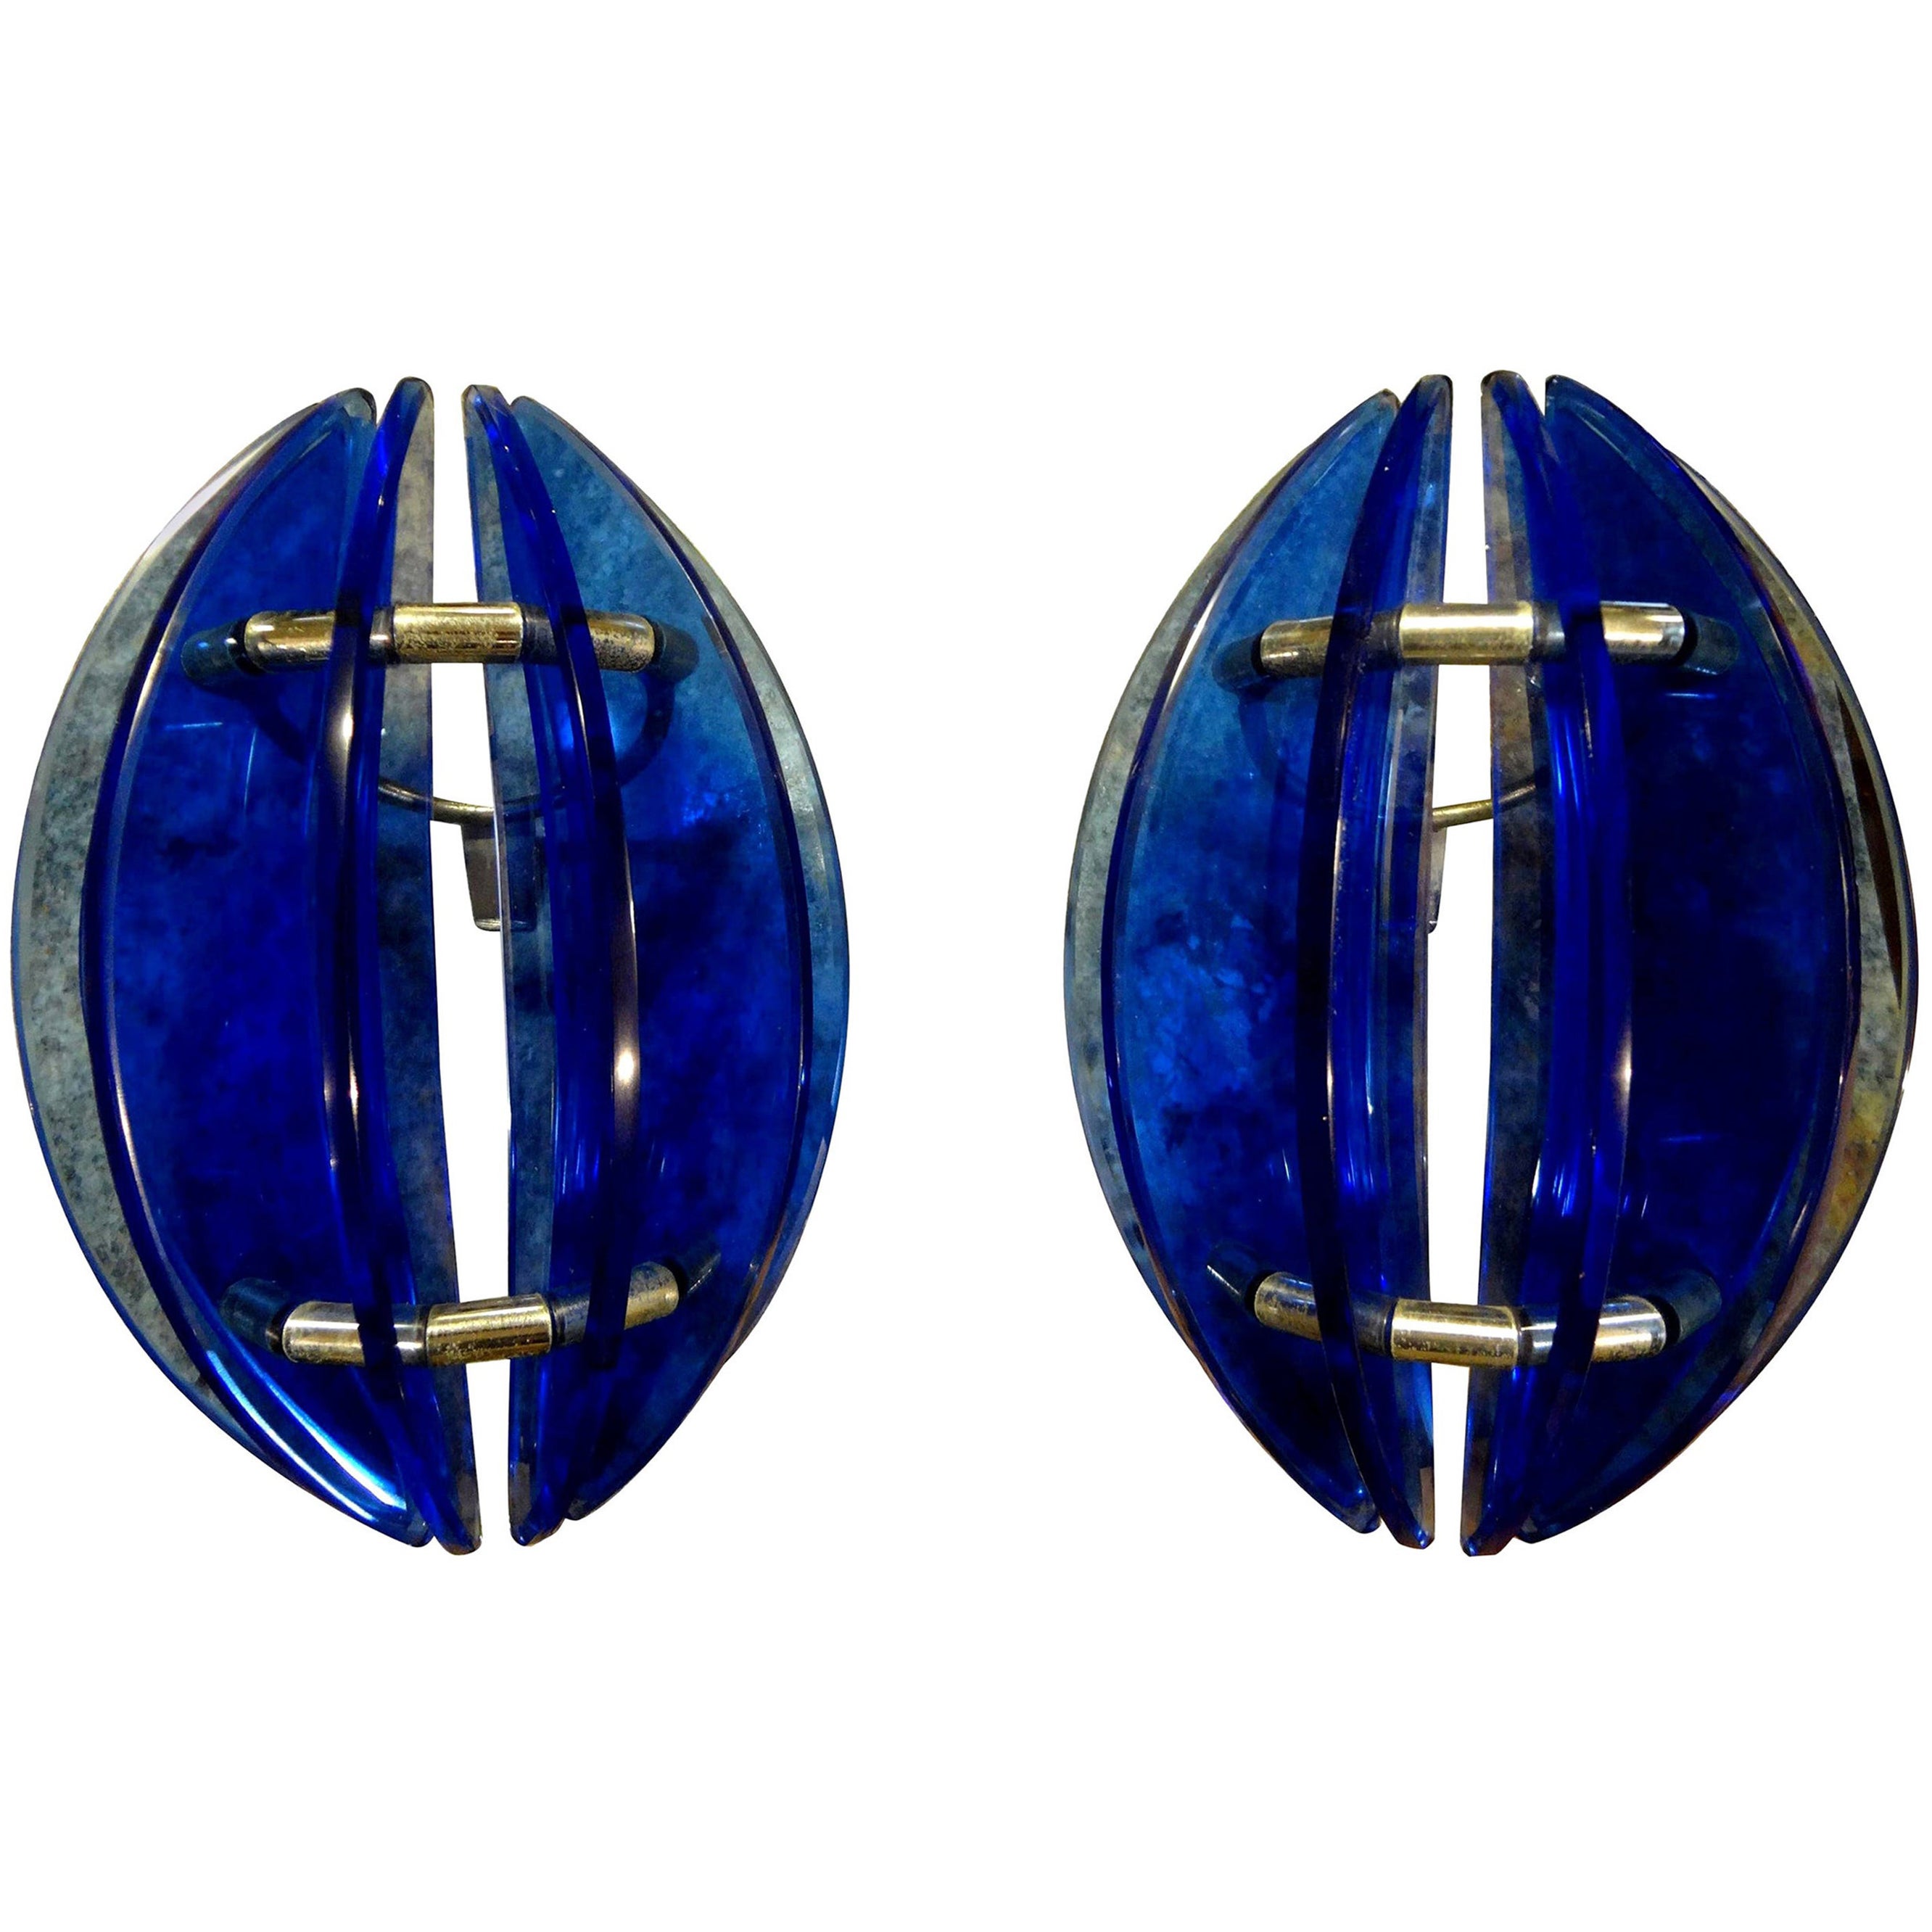 Pair of Midcentury Italian Cobalt Blue Glass Sconces by Veca For Sale